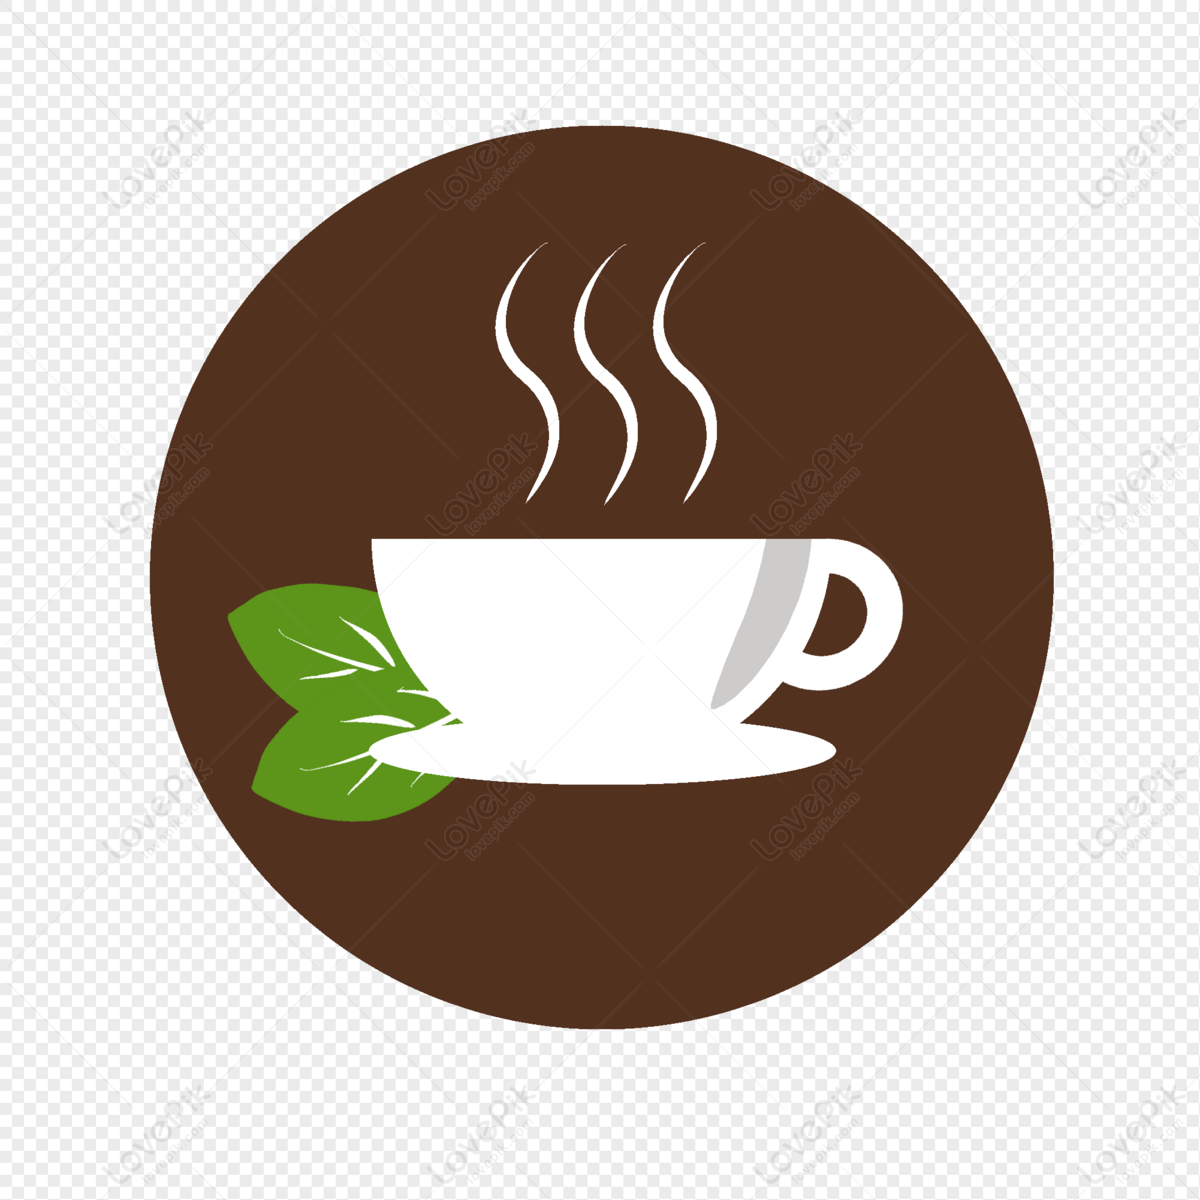 Coffee Cup Teacup Icon PNG Transparent Image And Clipart Image For Free  Download - Lovepik | 401241177